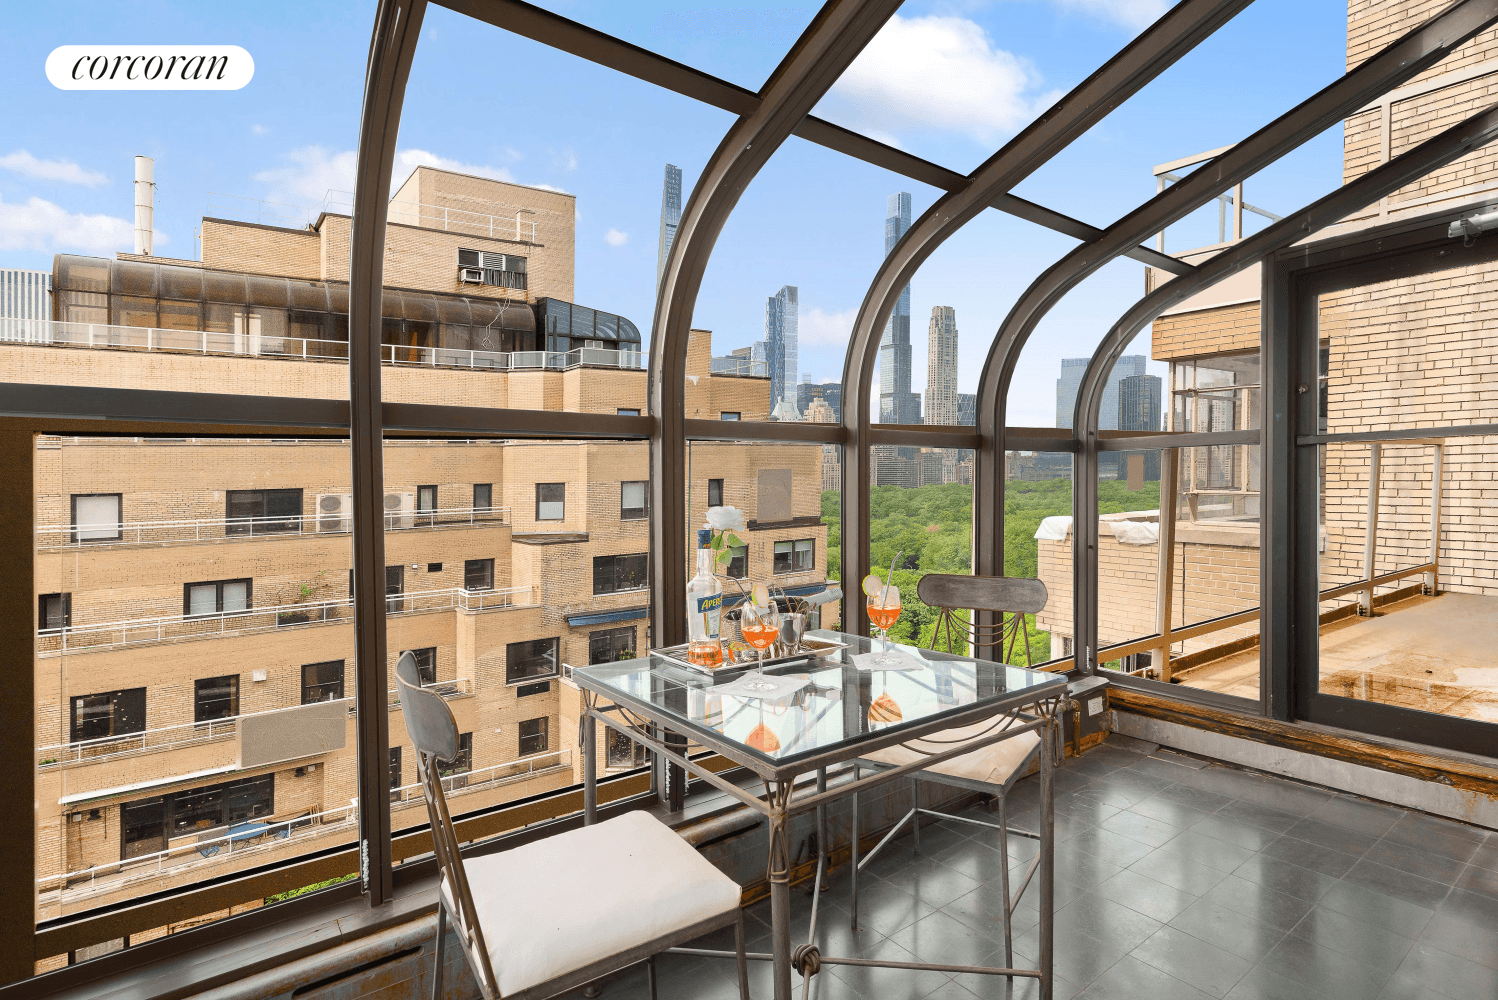 For the first time in 40 years, Penthouse 20 21C will be coming to market.